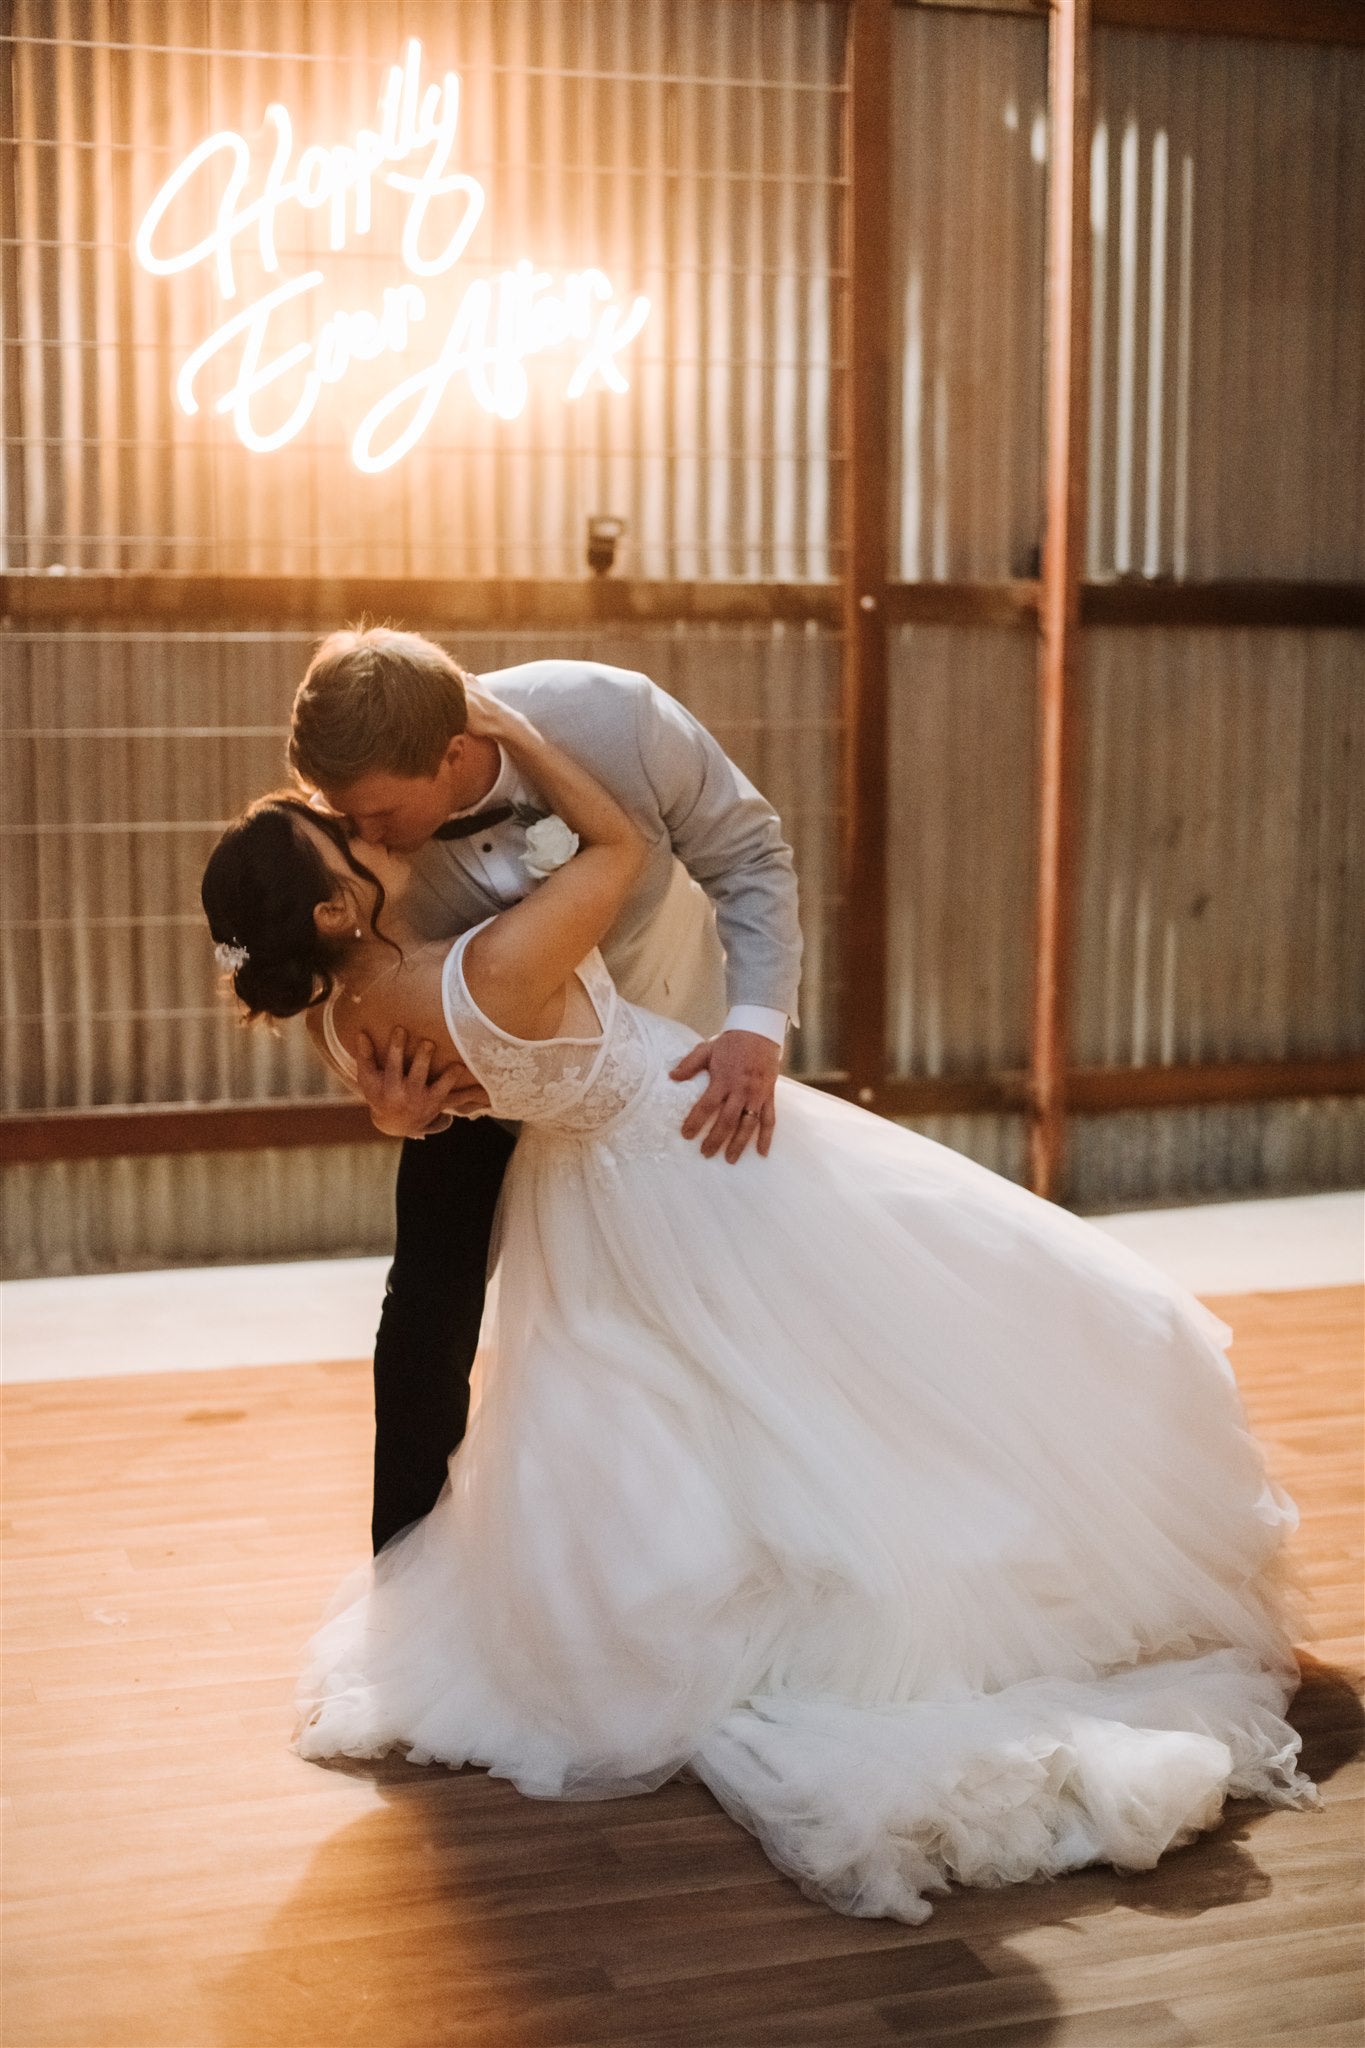 The First Dance for Katelyn + Jayson at Barton Park